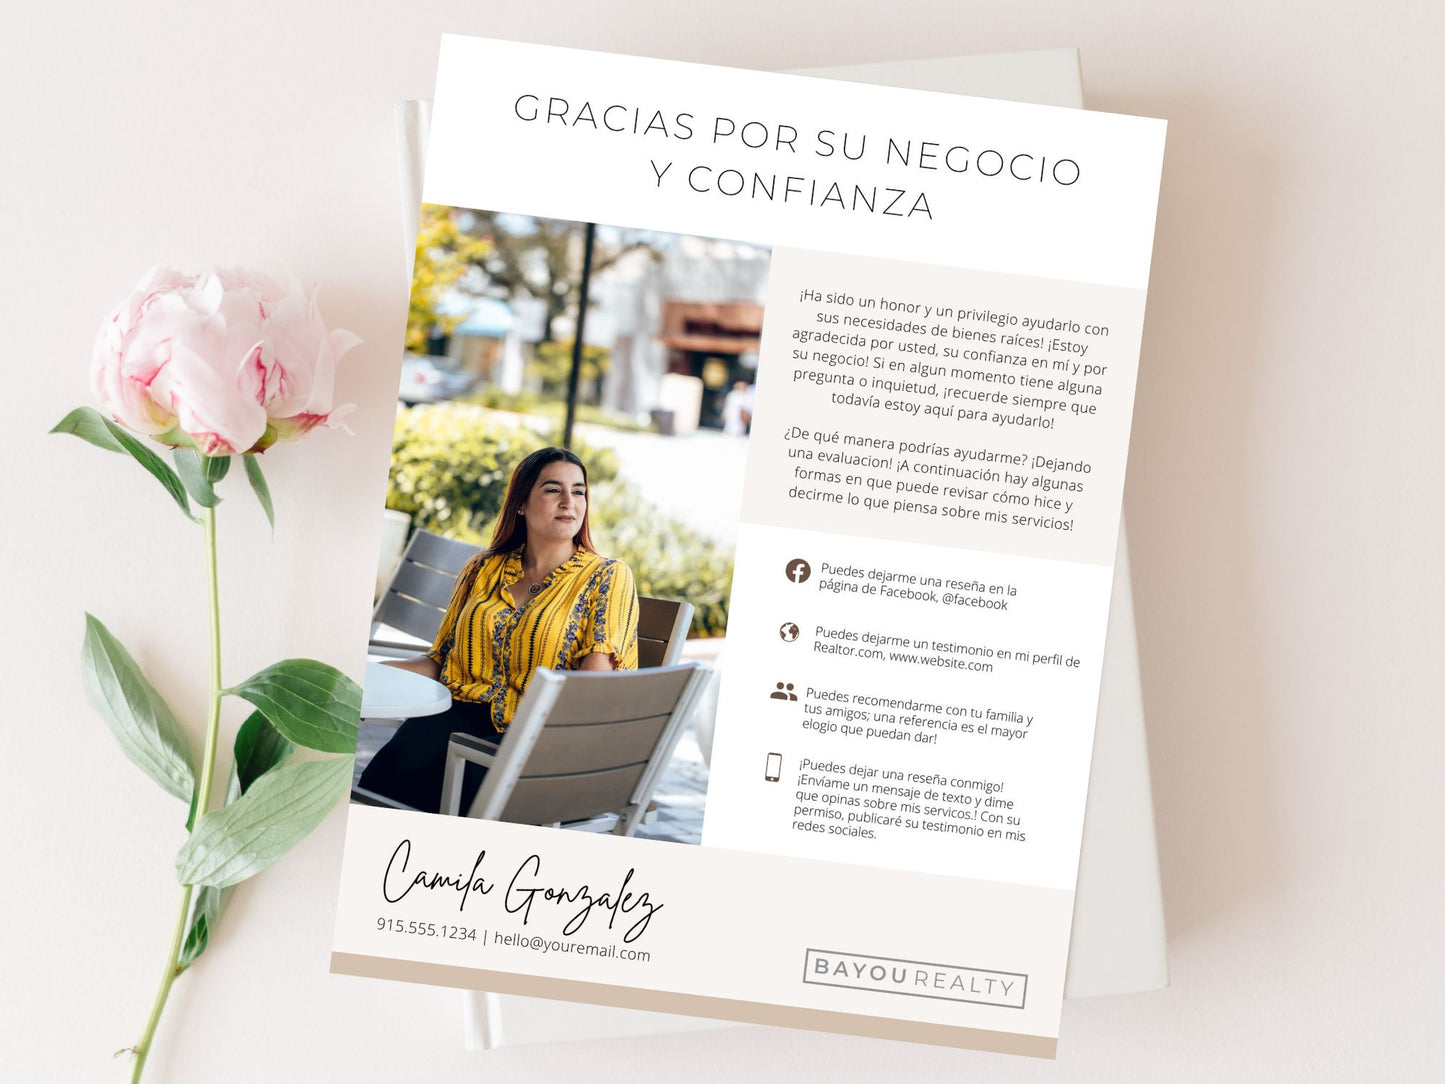 Spanish Review Request Flyer - Solicit client feedback in Spanish with this visually appealing flyer, encouraging Spanish-speaking clients to share their experiences for building trust and credibility.